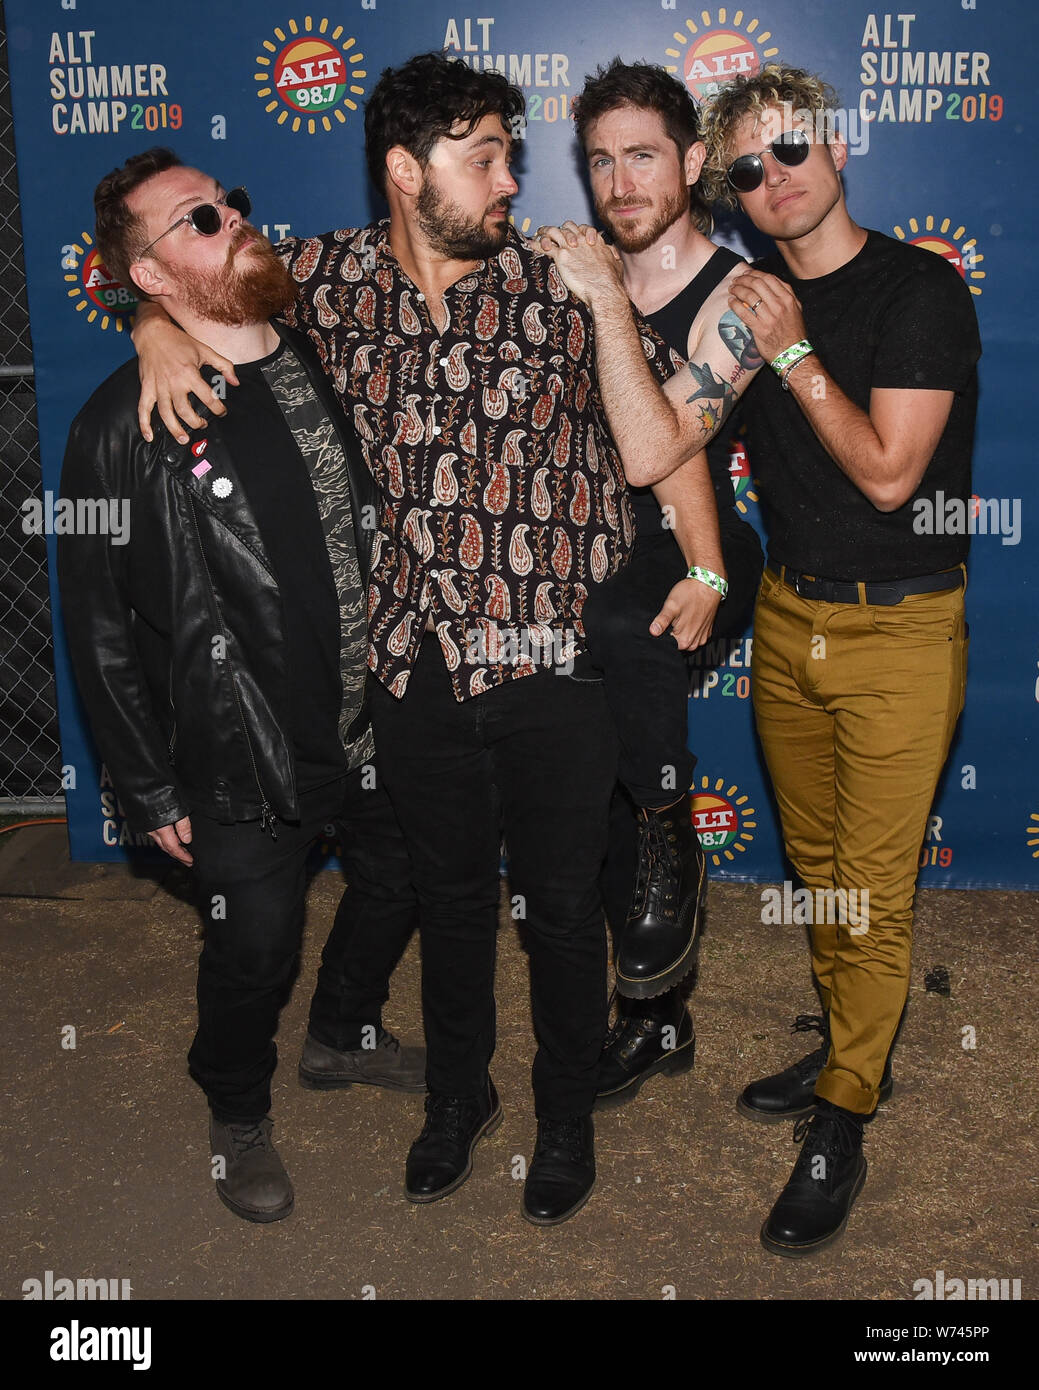 Long Beach, California, USA. 3rd Aug 2019. Sean Waugaman, Nicholas Petricca, Eli Maiman and Kevin Ray of the band Walk the Moon pose for a portrait backstage ALT 98.7 Summer Camp at the Queen Mary Event Park in Long Beach on August 3, 2019. Credit: The Photo Access/Alamy Live News Stock Photo